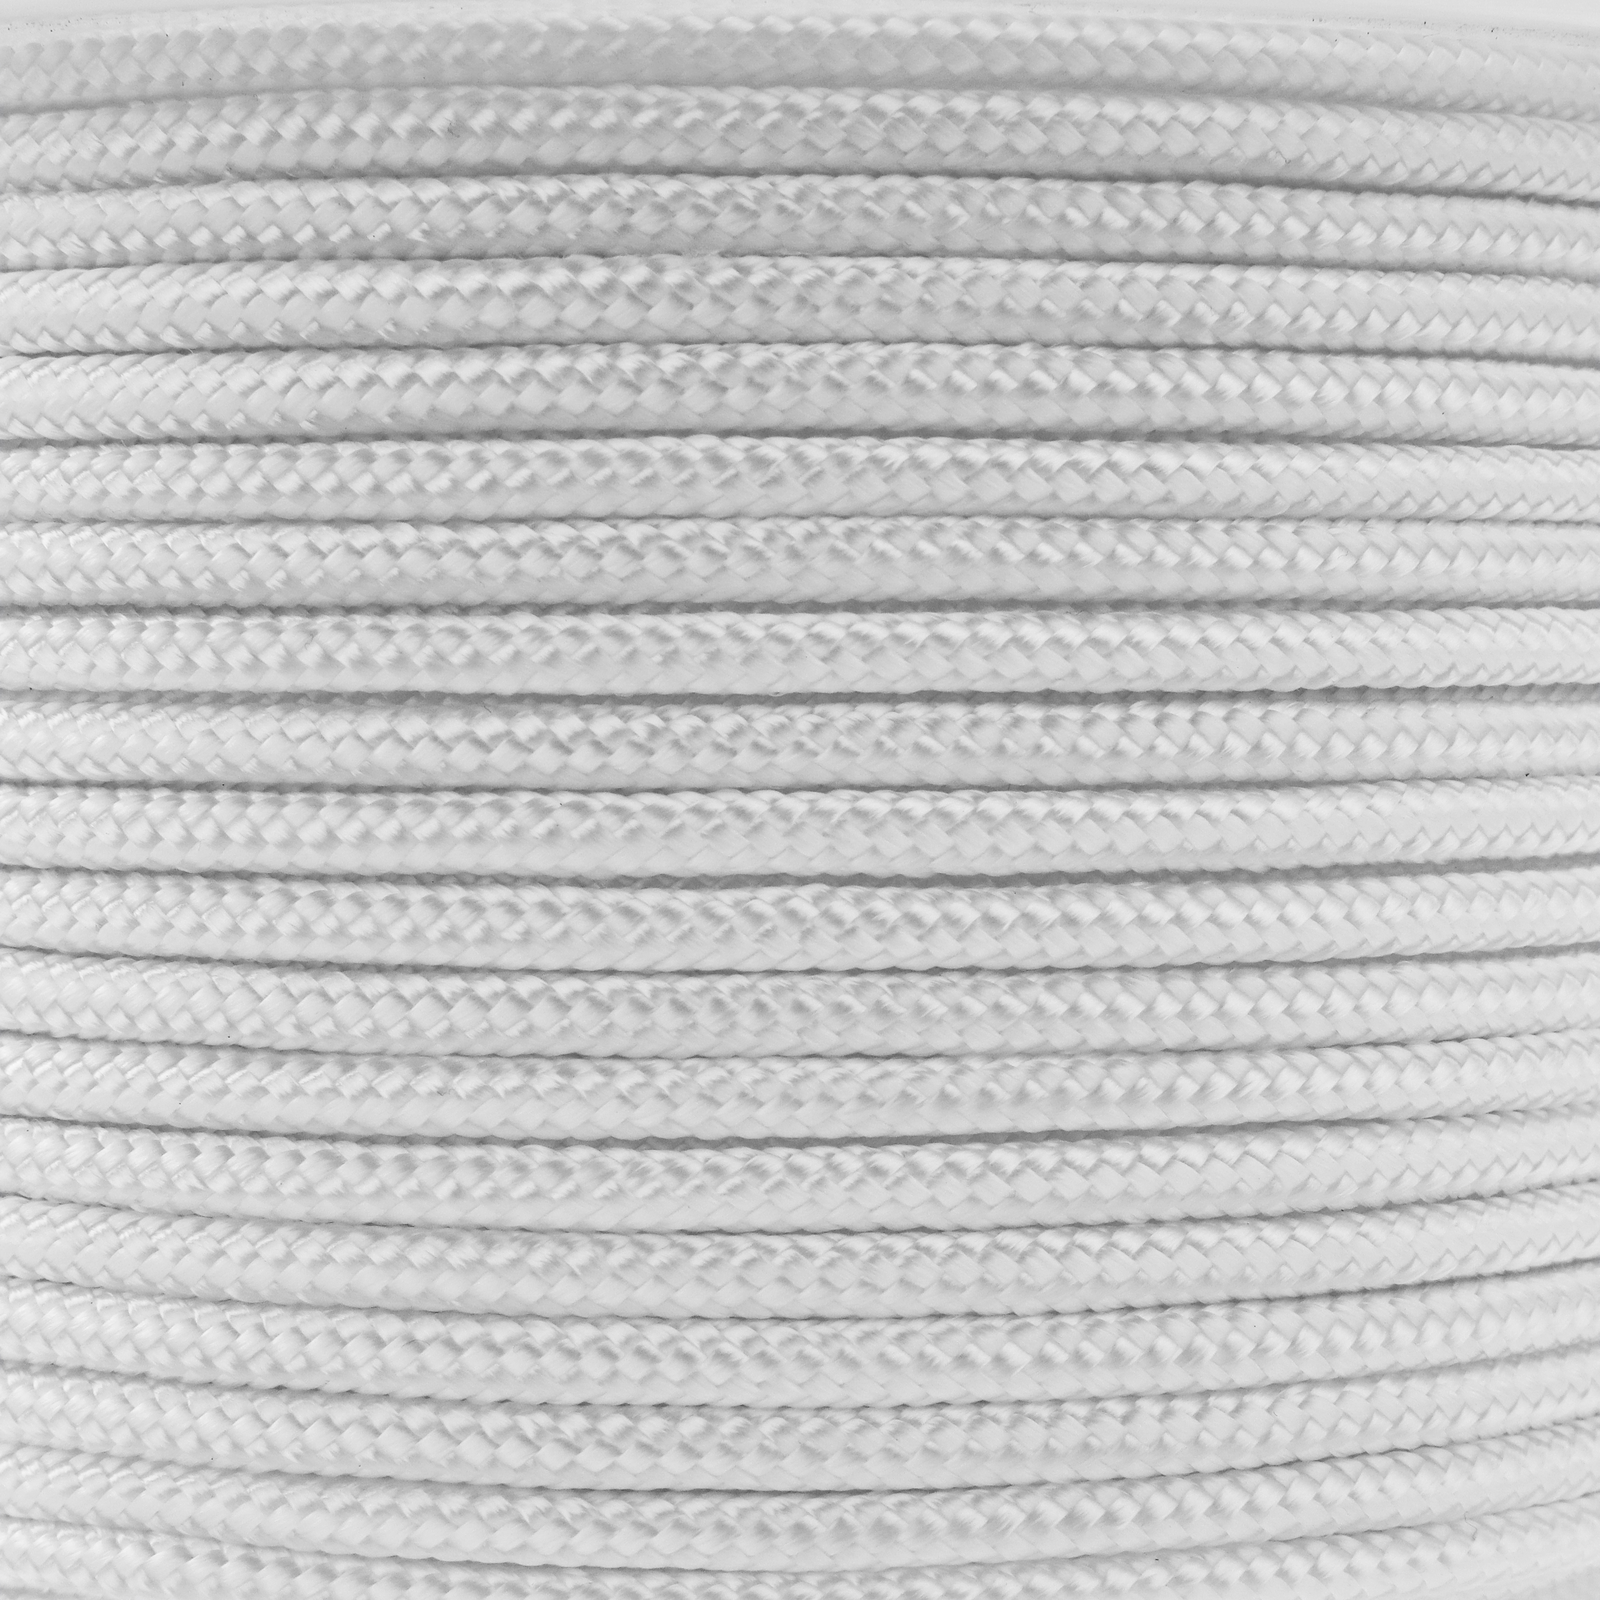 Braided polyester rope 20 m x 6 mm white - Cablematic